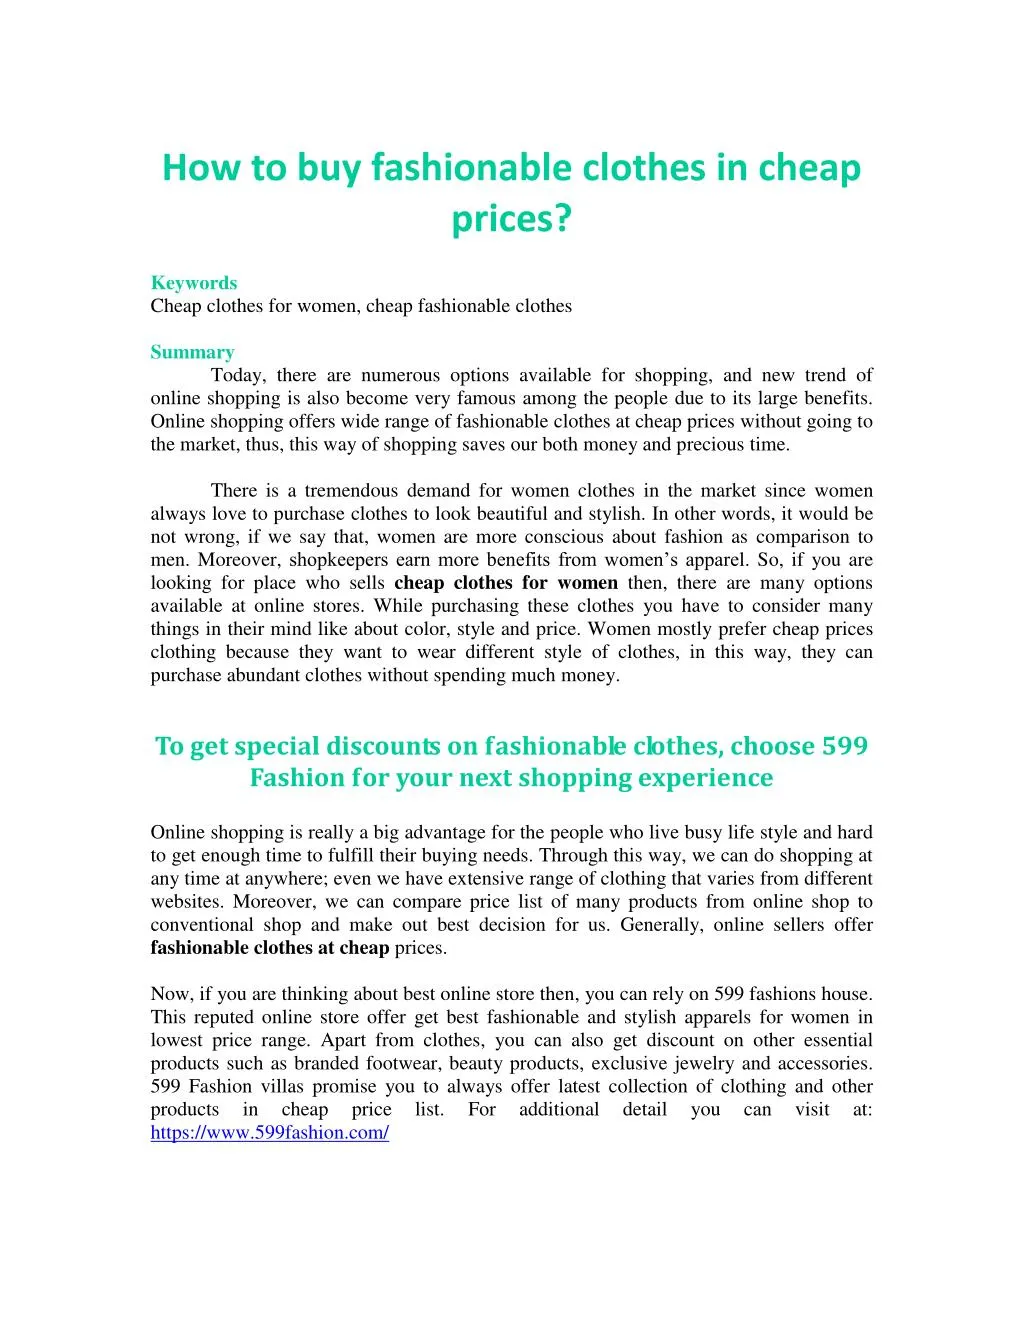 how to buy fashionable clothes in cheap prices